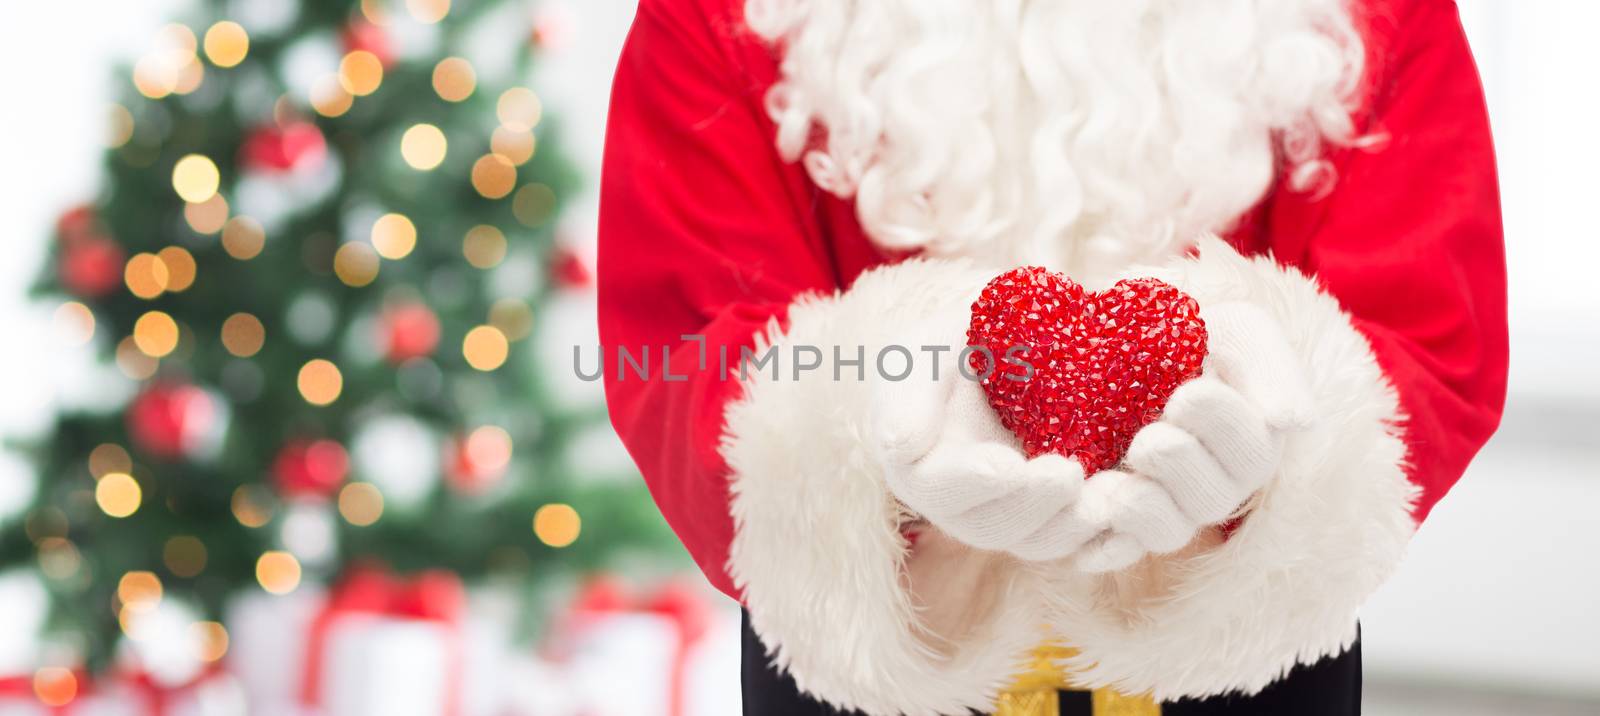 close up of santa claus with heart shape by dolgachov